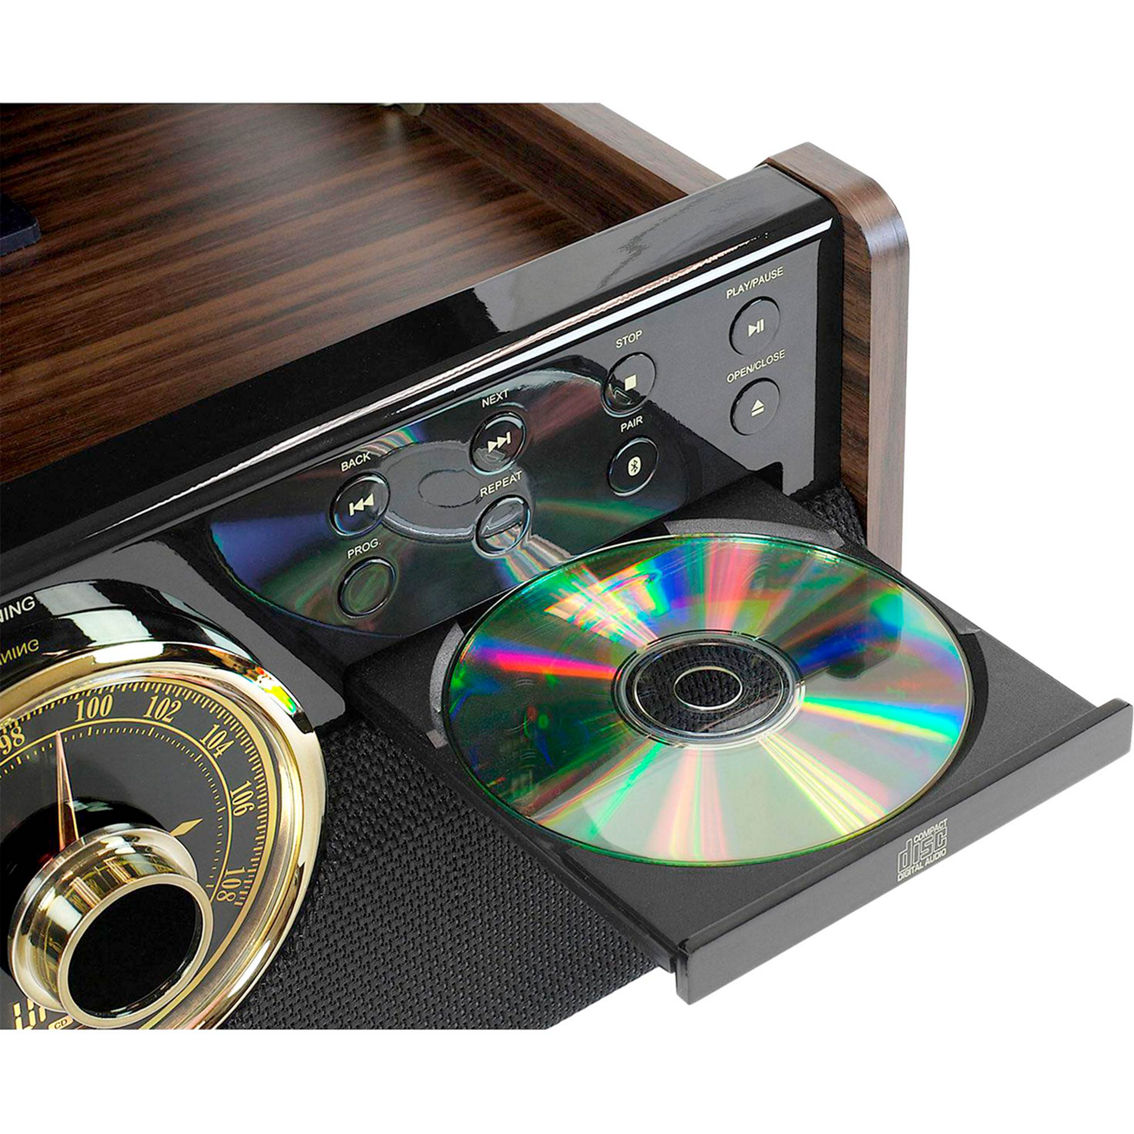 Victrola Turntable, Radio, CD and Cassette Player with Bluetooth - Image 2 of 3